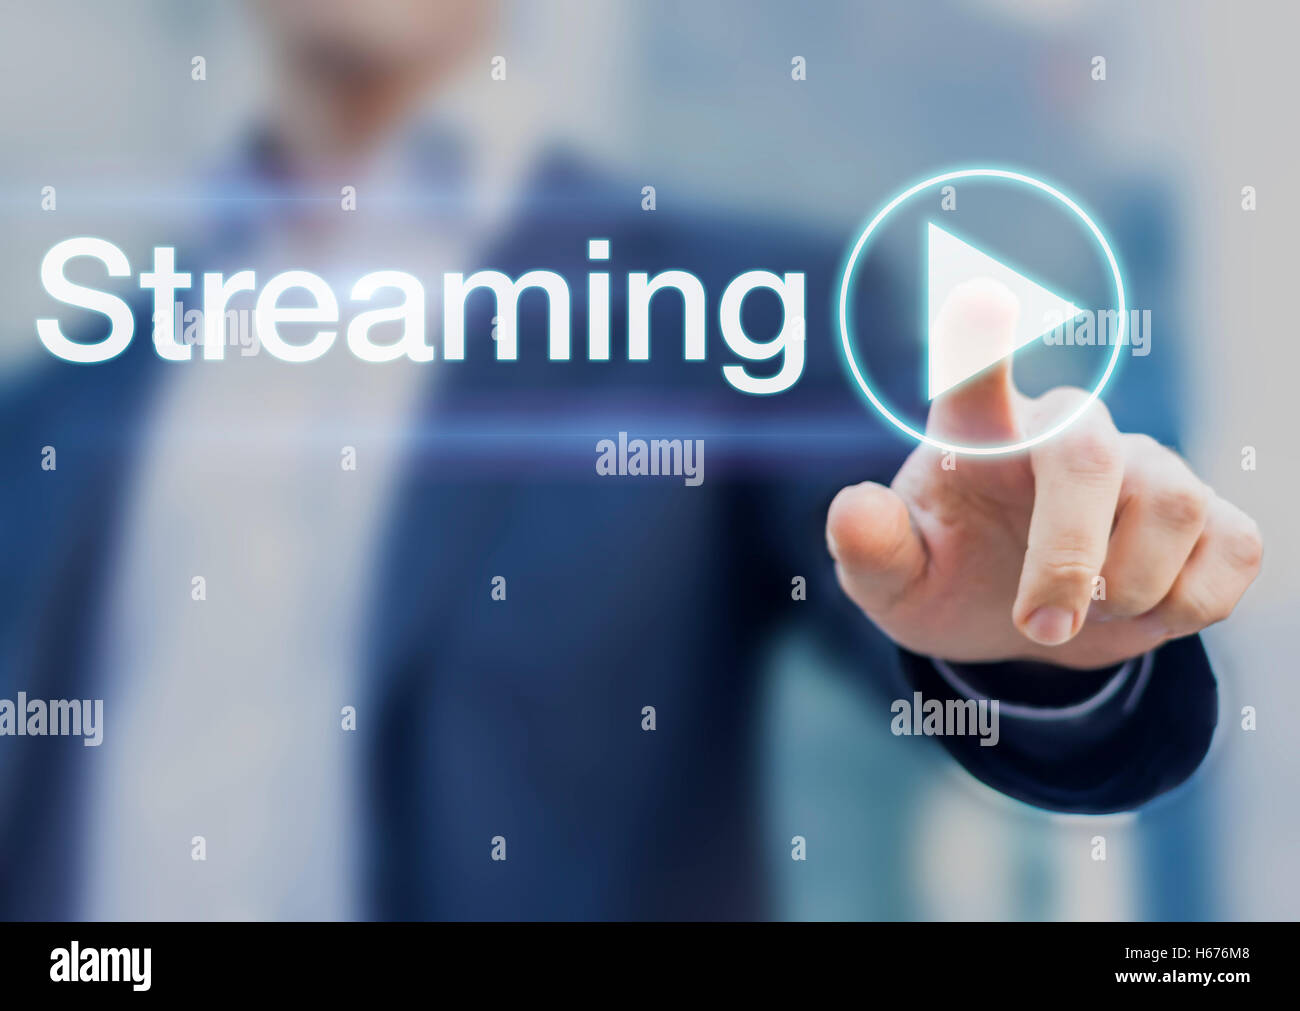 Streaming media concept with play button on digital interface with a person in the background Stock Photo